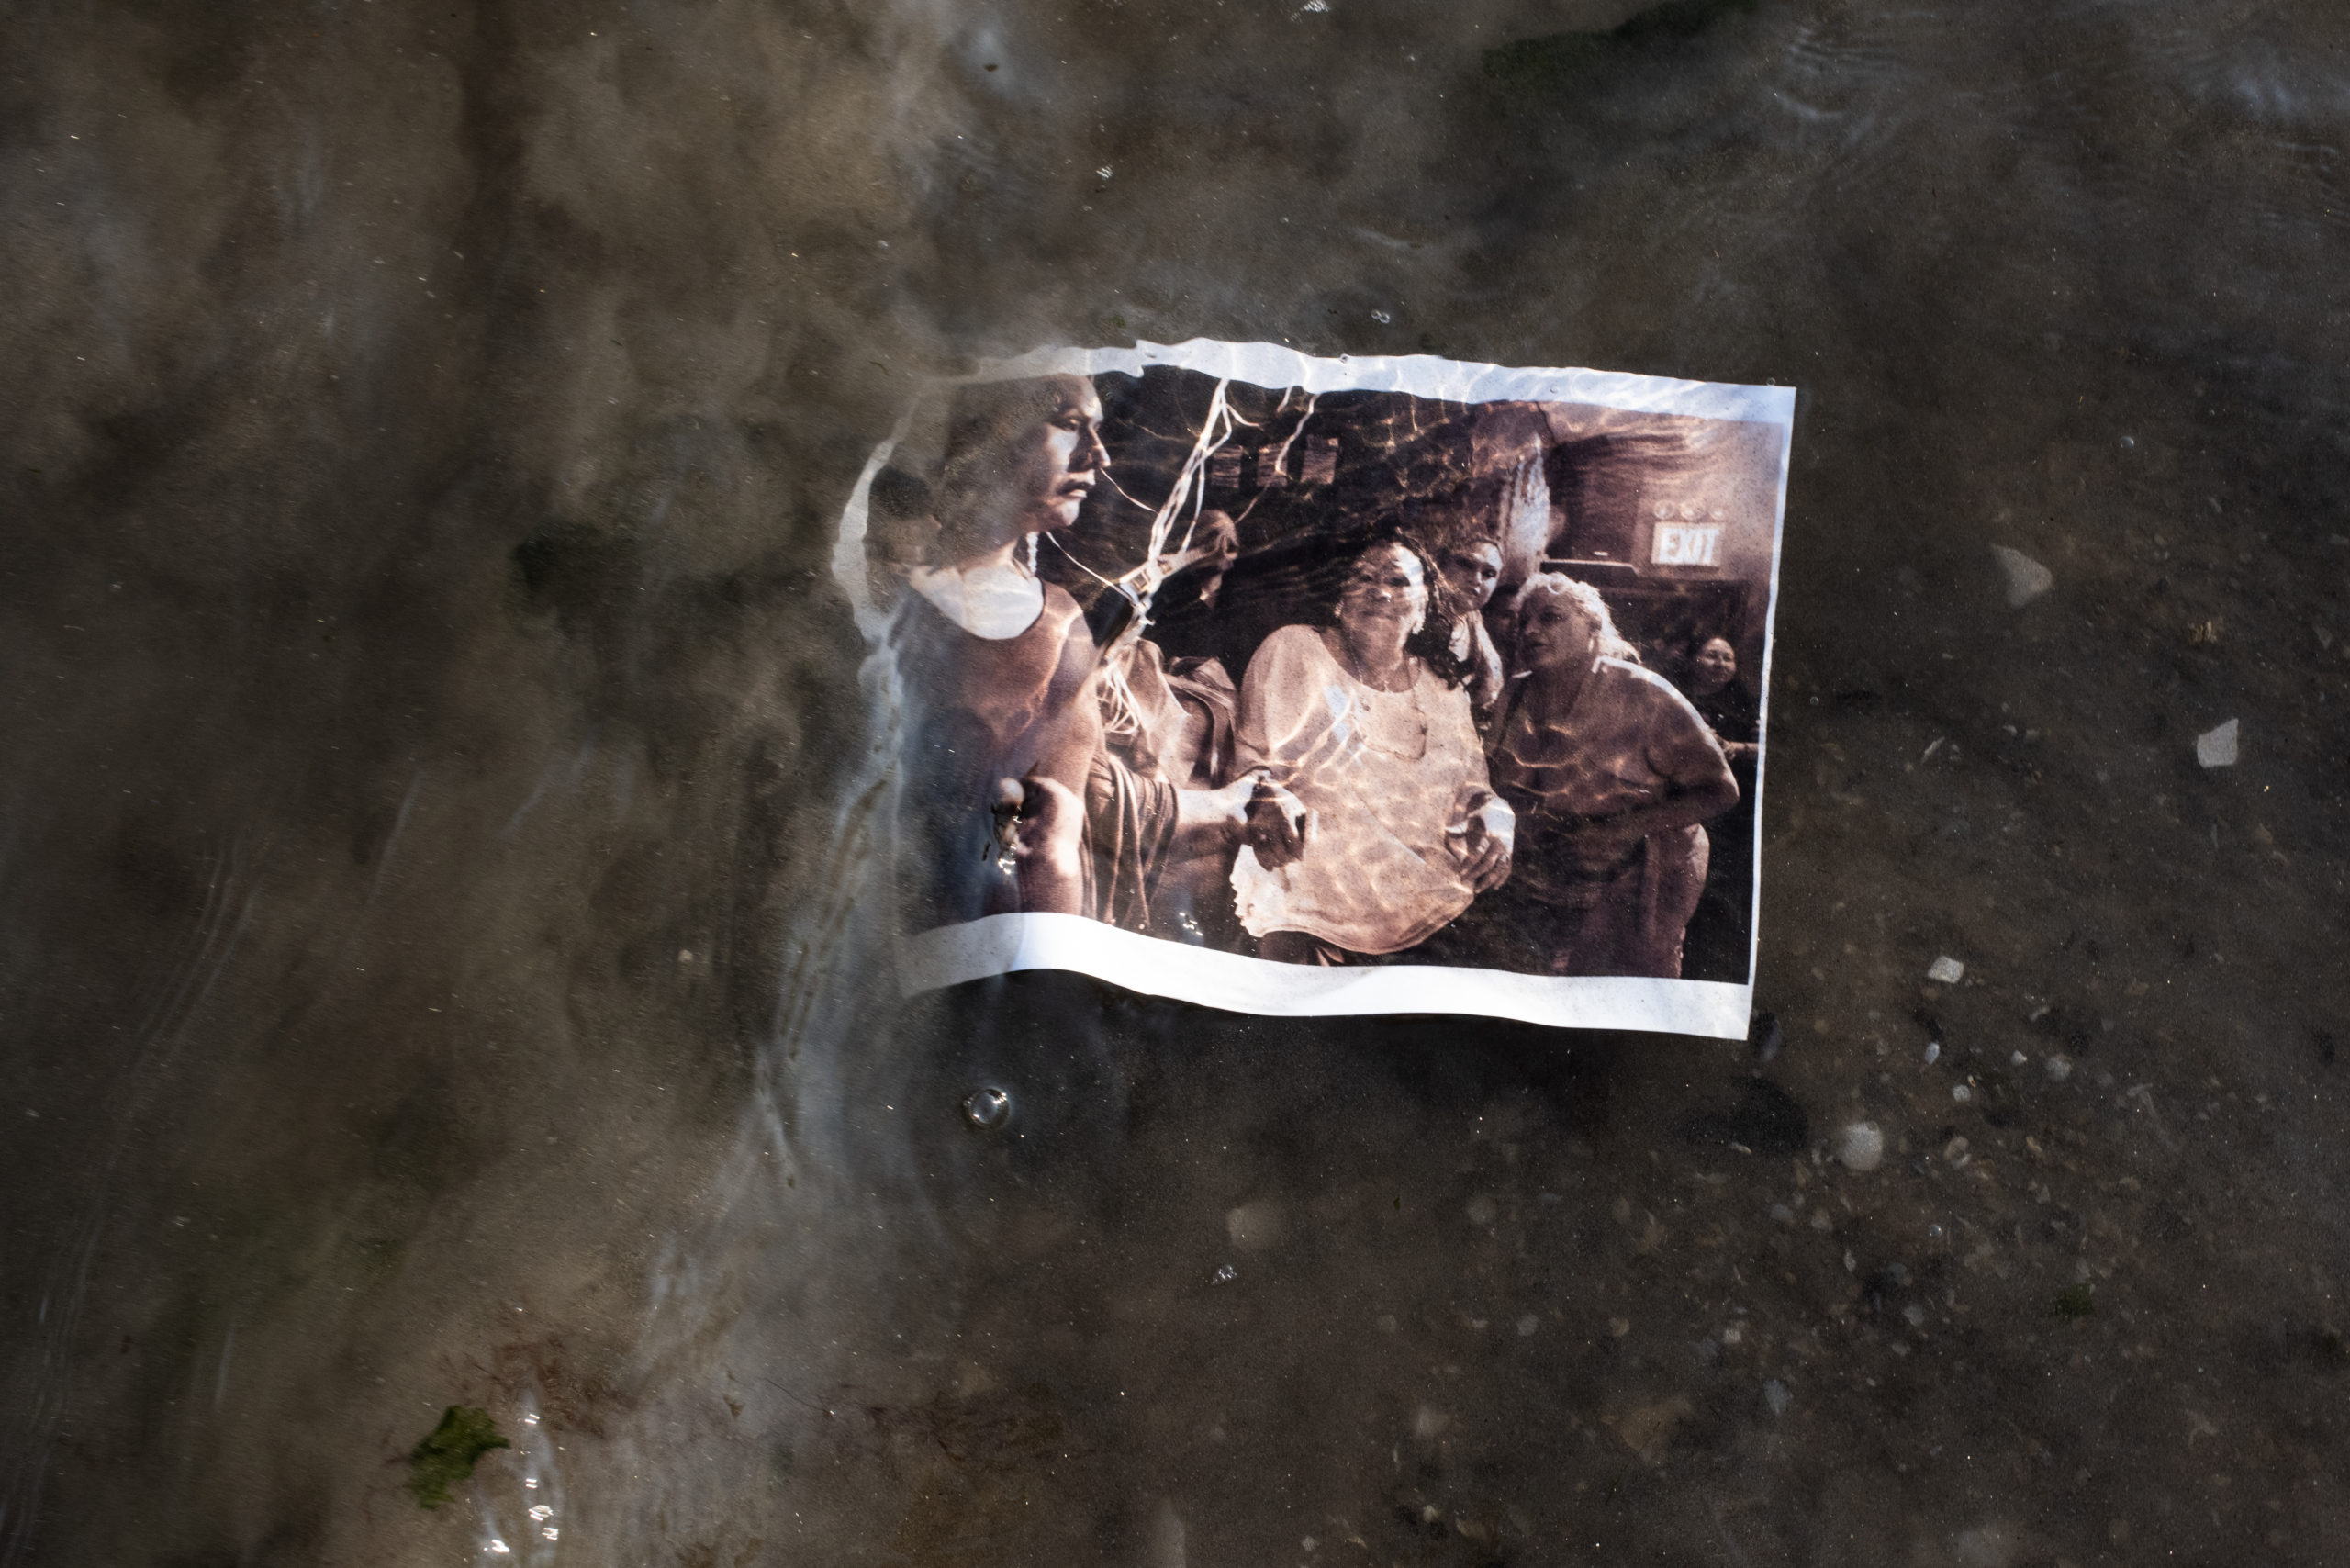 A polaroid photo, of a group of women of color, submerged in water. Ripples of water distort the clarity of the image. Beneath the surface of the water is brown asphalt and dirt.